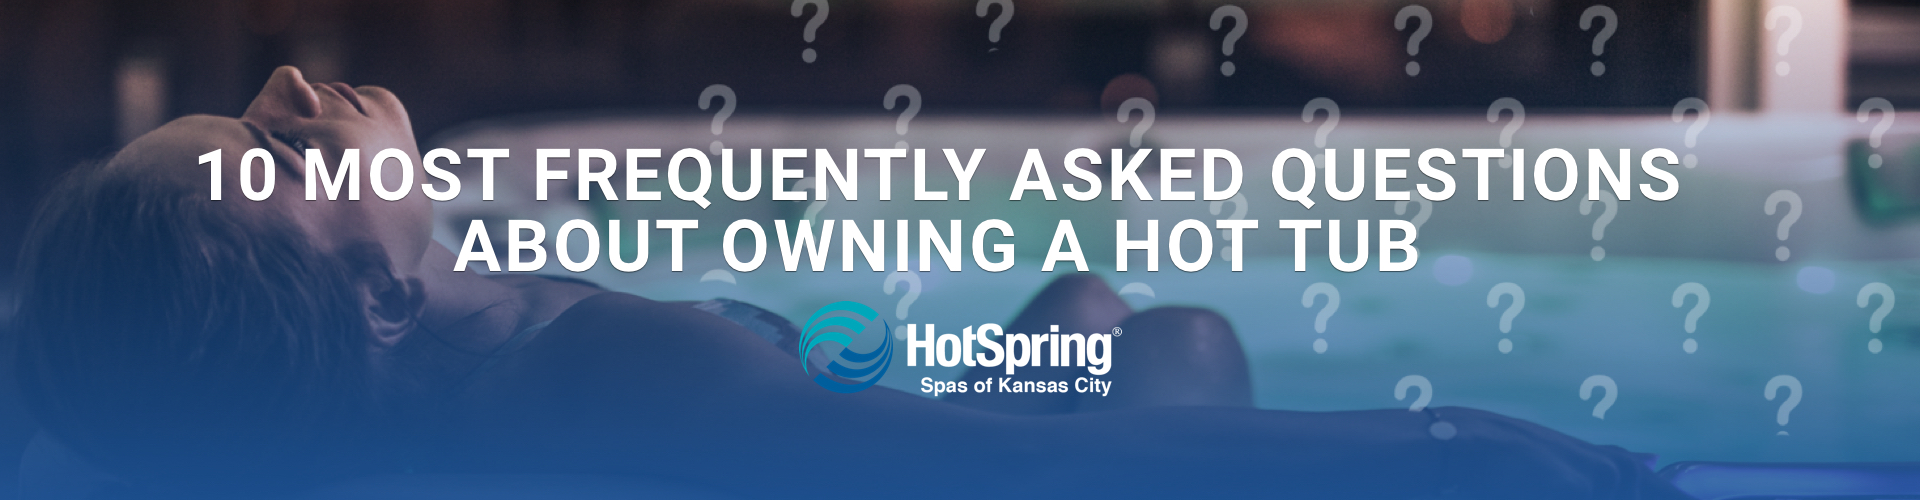 10 Most Frequently Asked Questions About Owning a Hot Tub